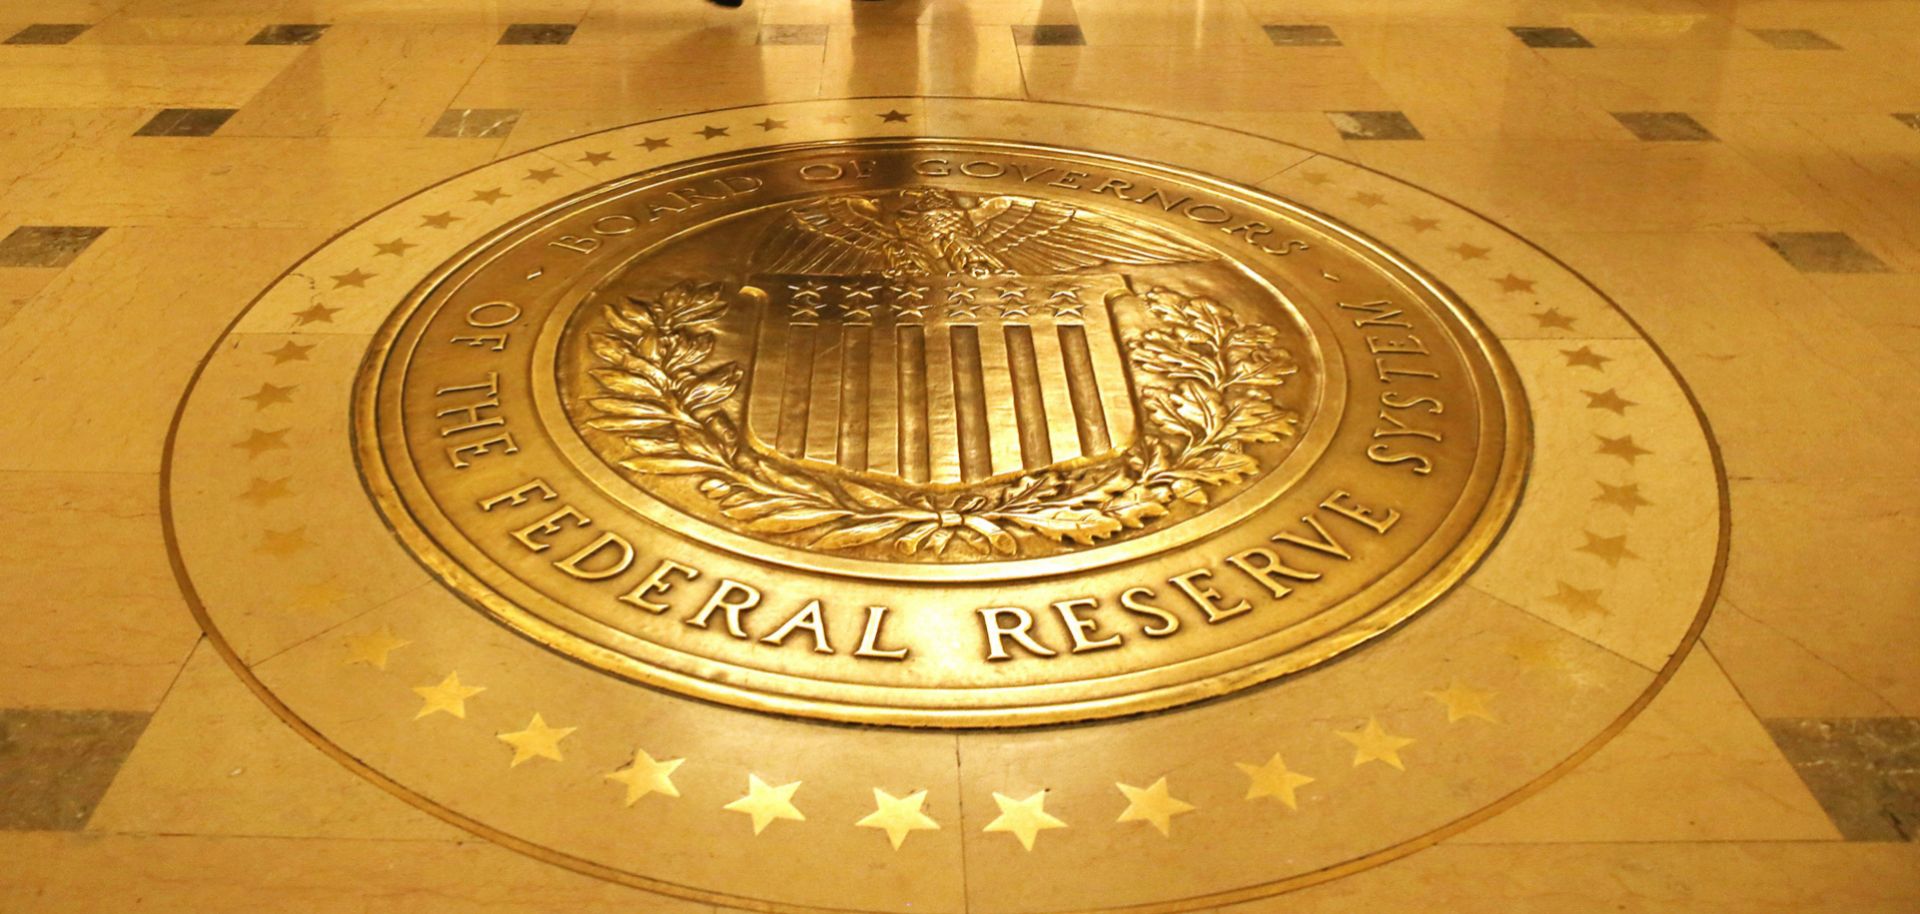 The Federal Reserve: A Chronology